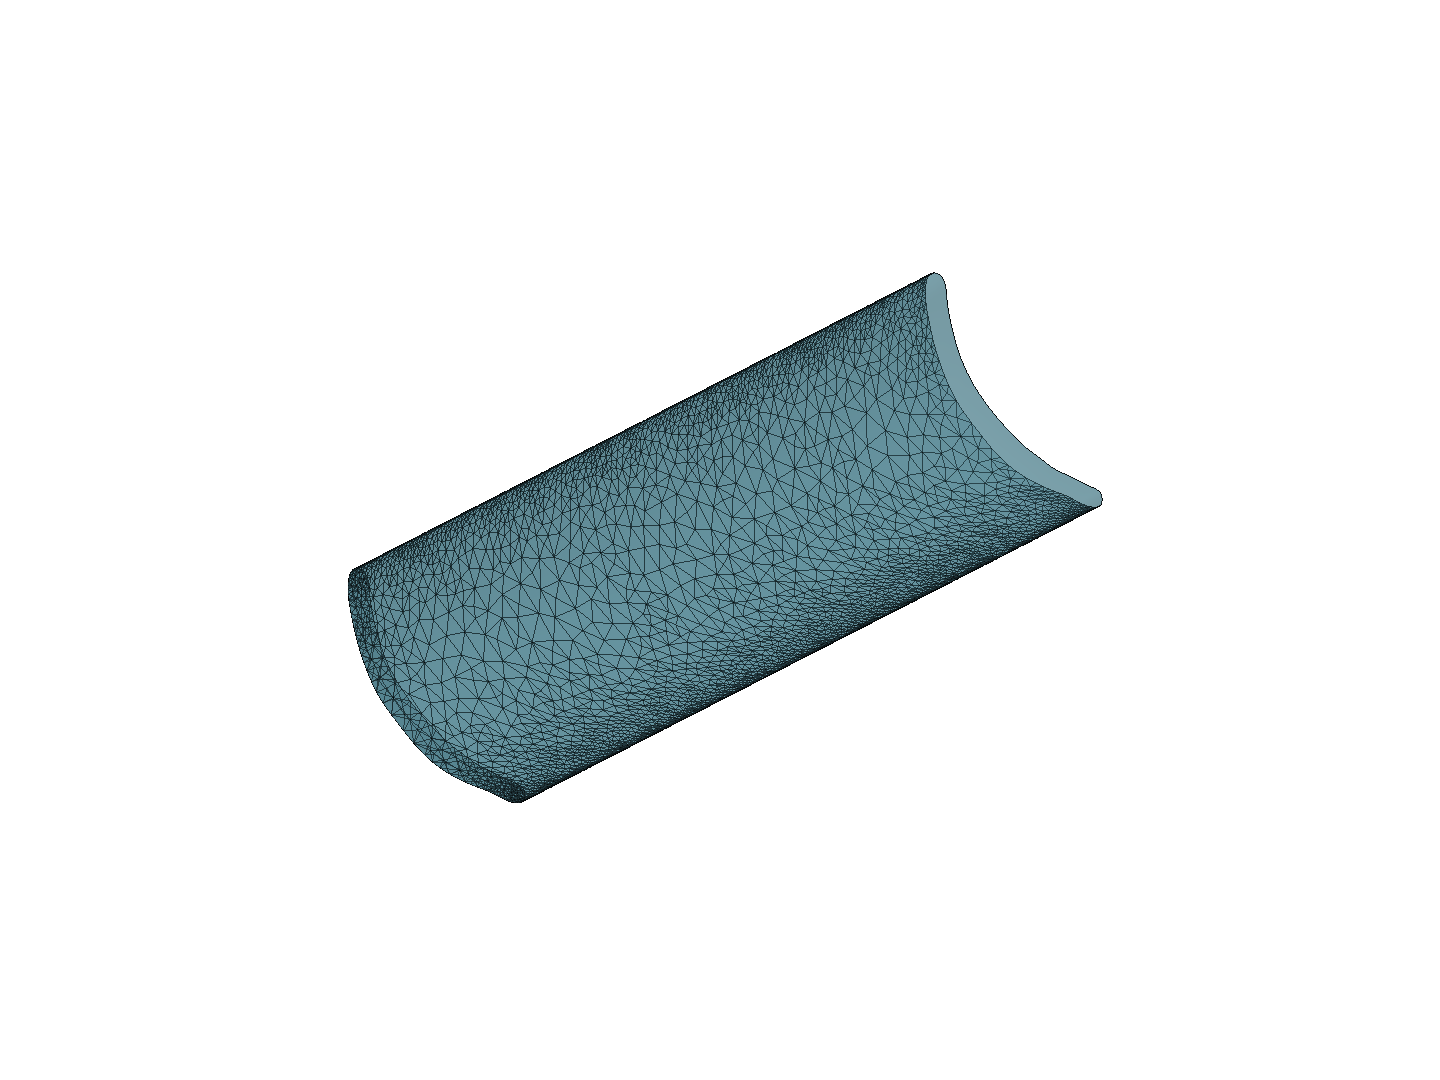 FEA of different materials image